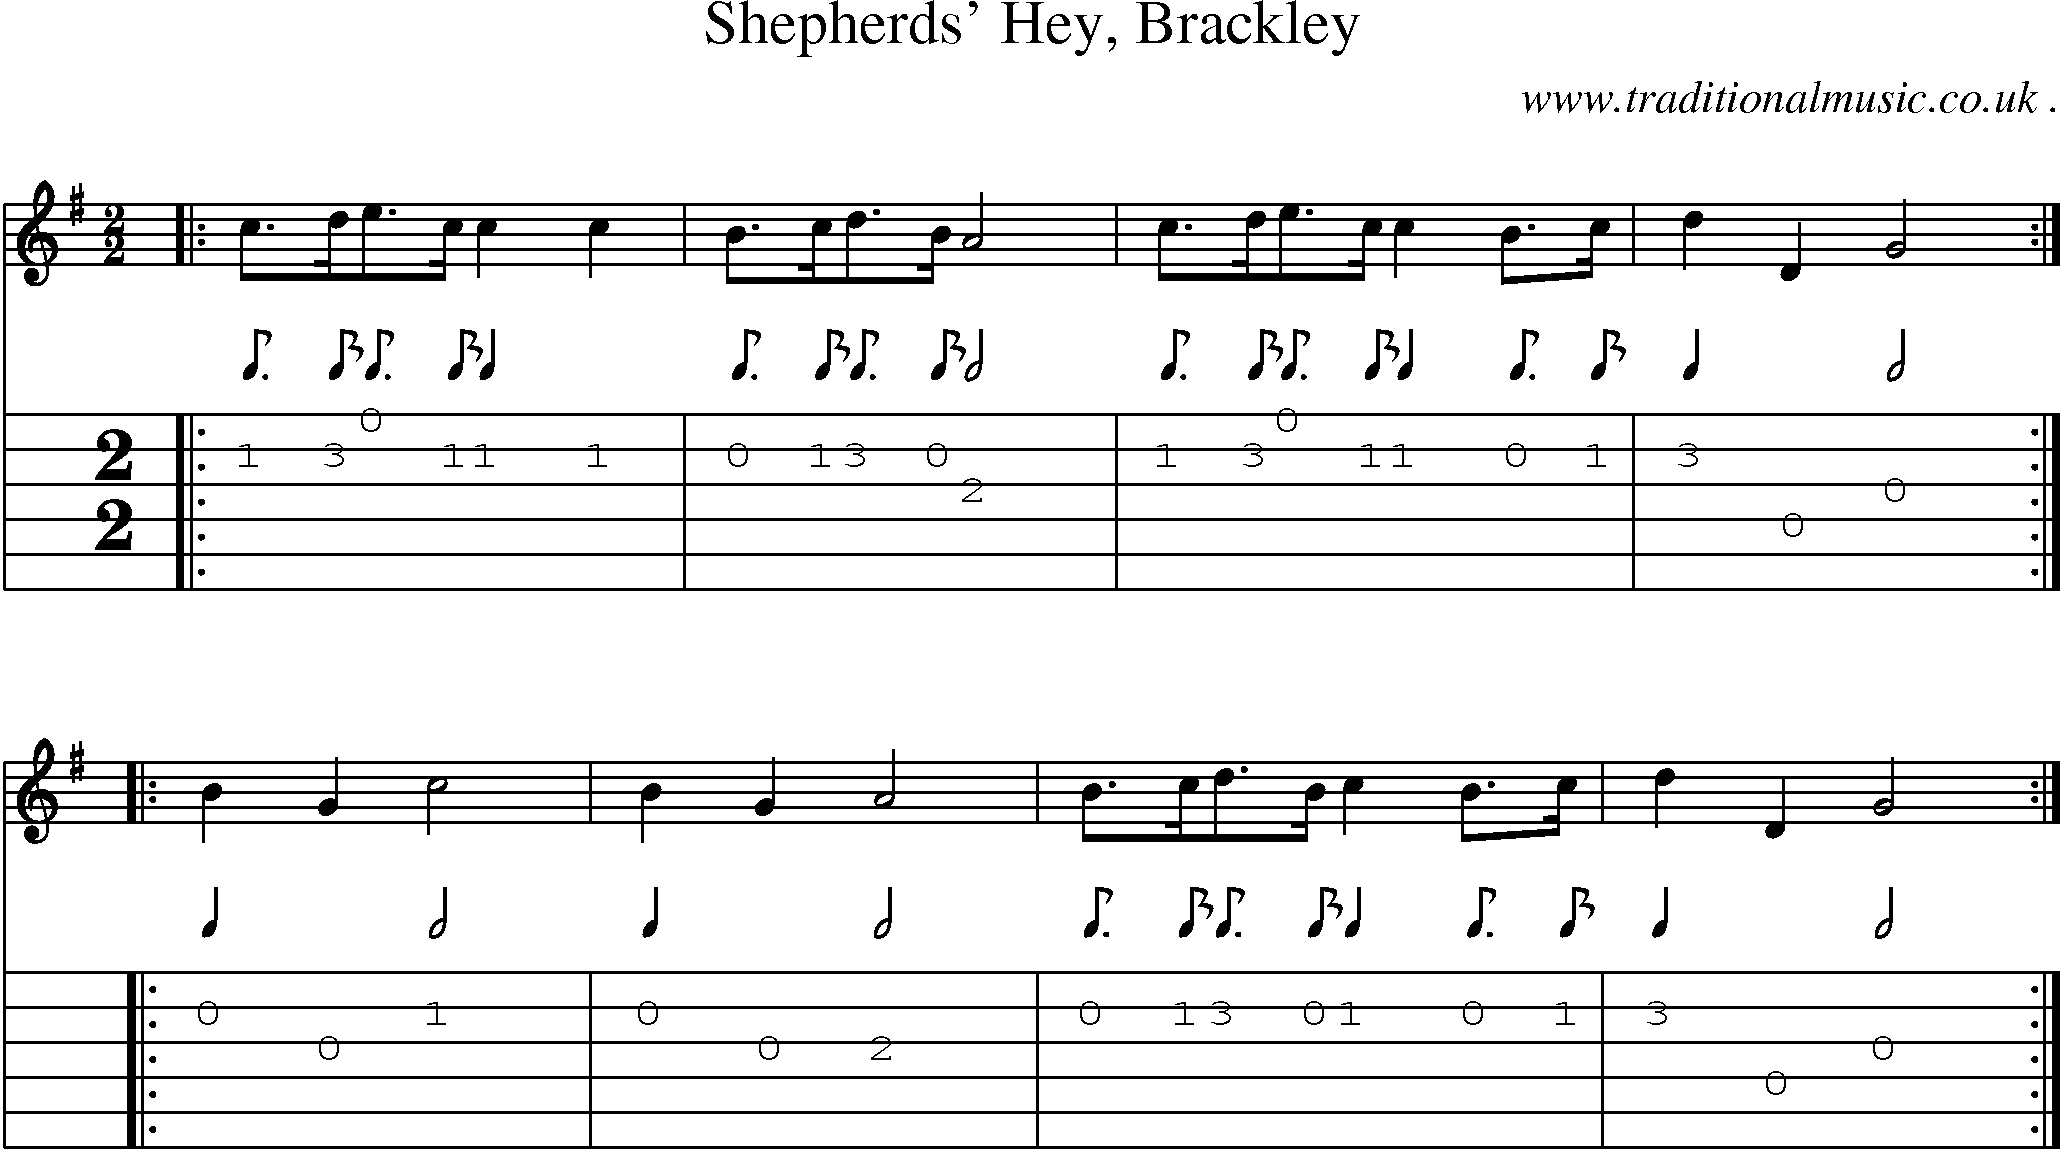 Sheet-Music and Guitar Tabs for Shepherds Hey Brackley